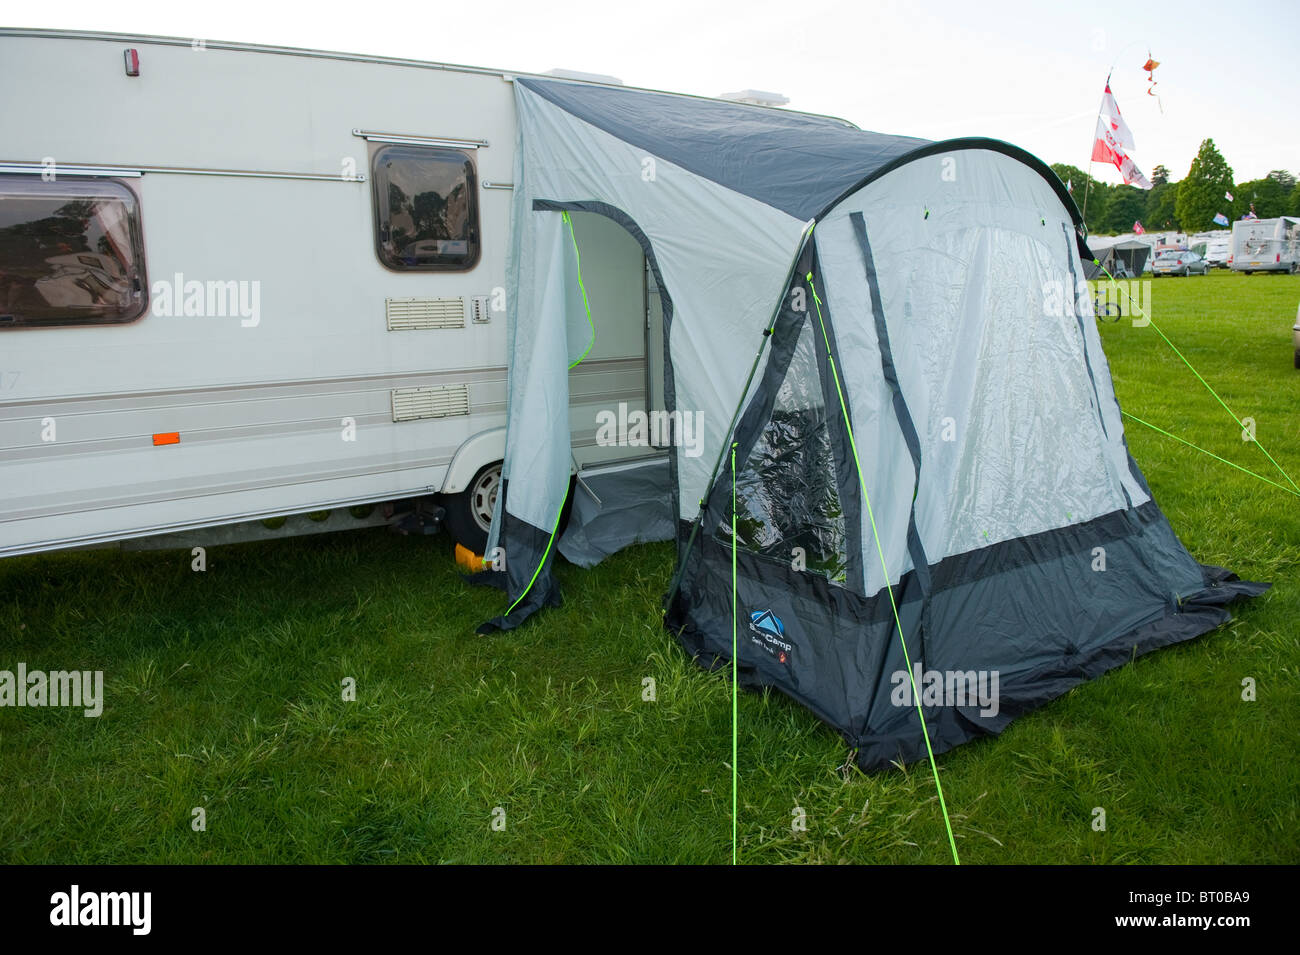 Caravan Porch Awning attached Stock Photo